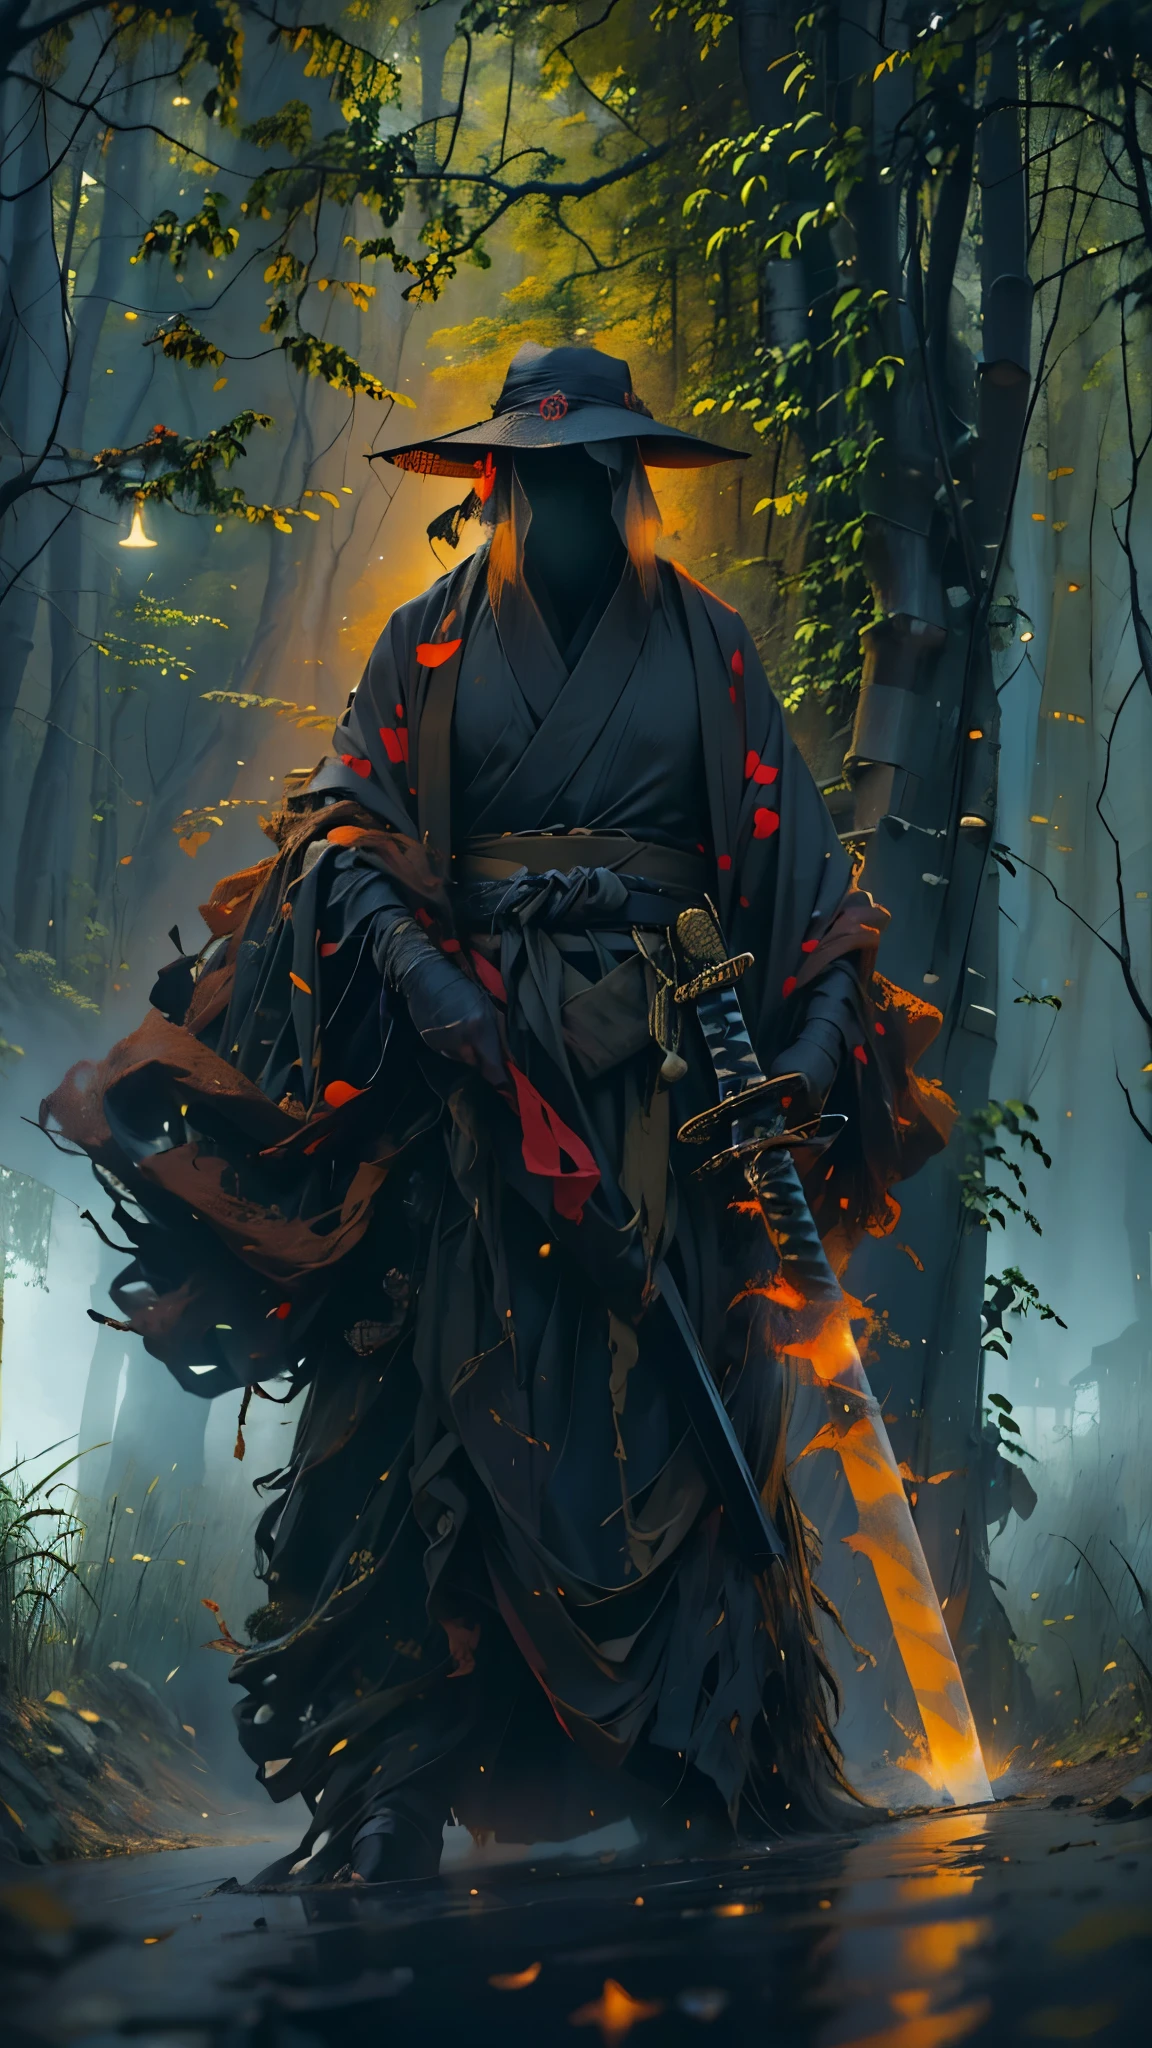 (best quality, 4k, highres, masterpiece:1.2), ultra-detailed, (realistic, photorealistic, photo-realistic:1.37), a man dressed as a samurai stands in the rain, wearing a bamboo hat (kasa) on his head. He is surrounded by a dense forest, alive with the sounds of nature. It's a moonlit night, and the darkness adds to the mysterious ambiance. The man is wearing a black kimono with neon red stripes that glow in the darkness, making him stand out in the scene. His sword (katana) is unsheathed, ready for action in the face of imminent disasters.